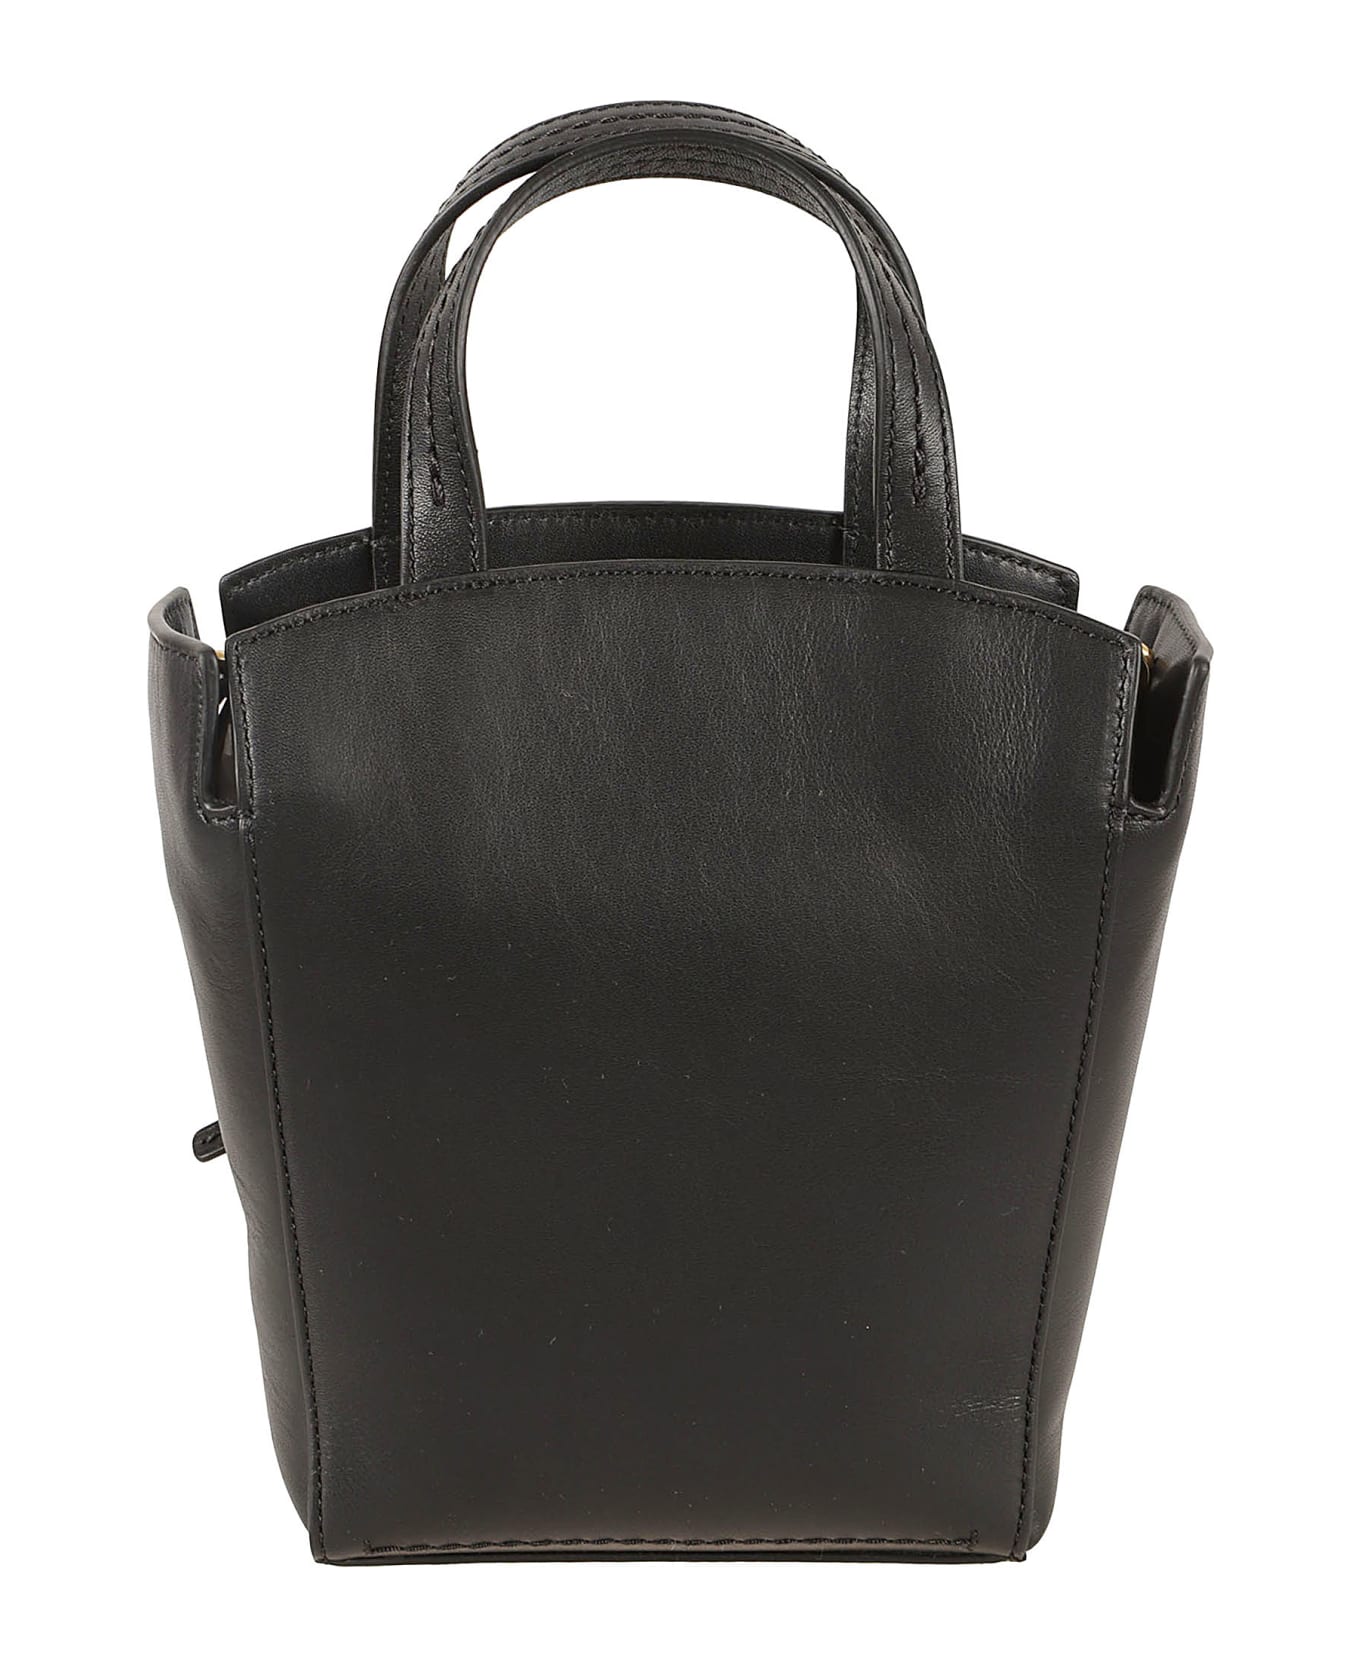 Mulberry Clovelly Mini Tote - BLACK